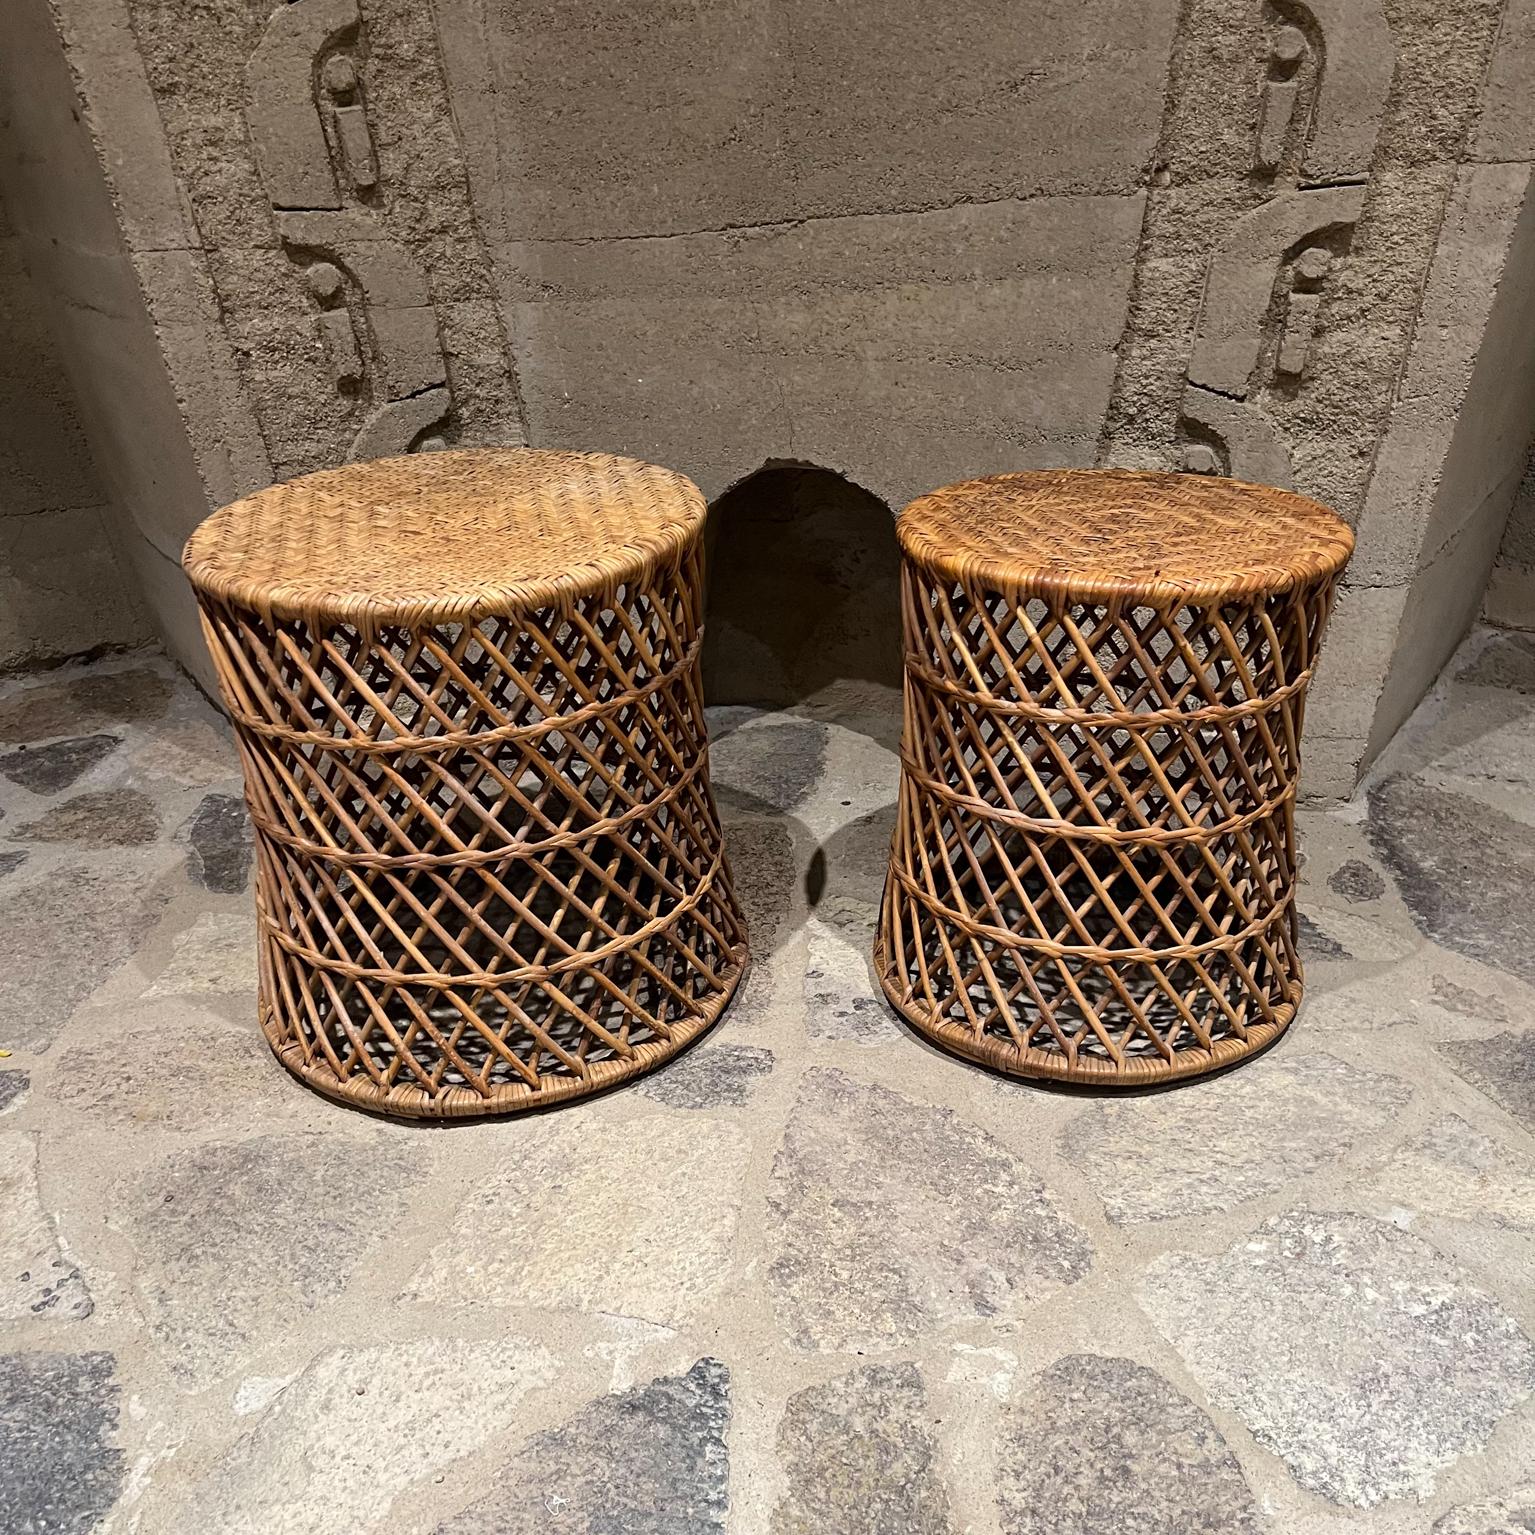 Set of two midcentury cane nesting tables vintage modern 
Unmarked, in the style of Franco Albini
Measures: Large 18 tall x 16.5 diameter, Small 17 tall x 14 diameter
Preowned original unrestored vintage condition.
Refer to images